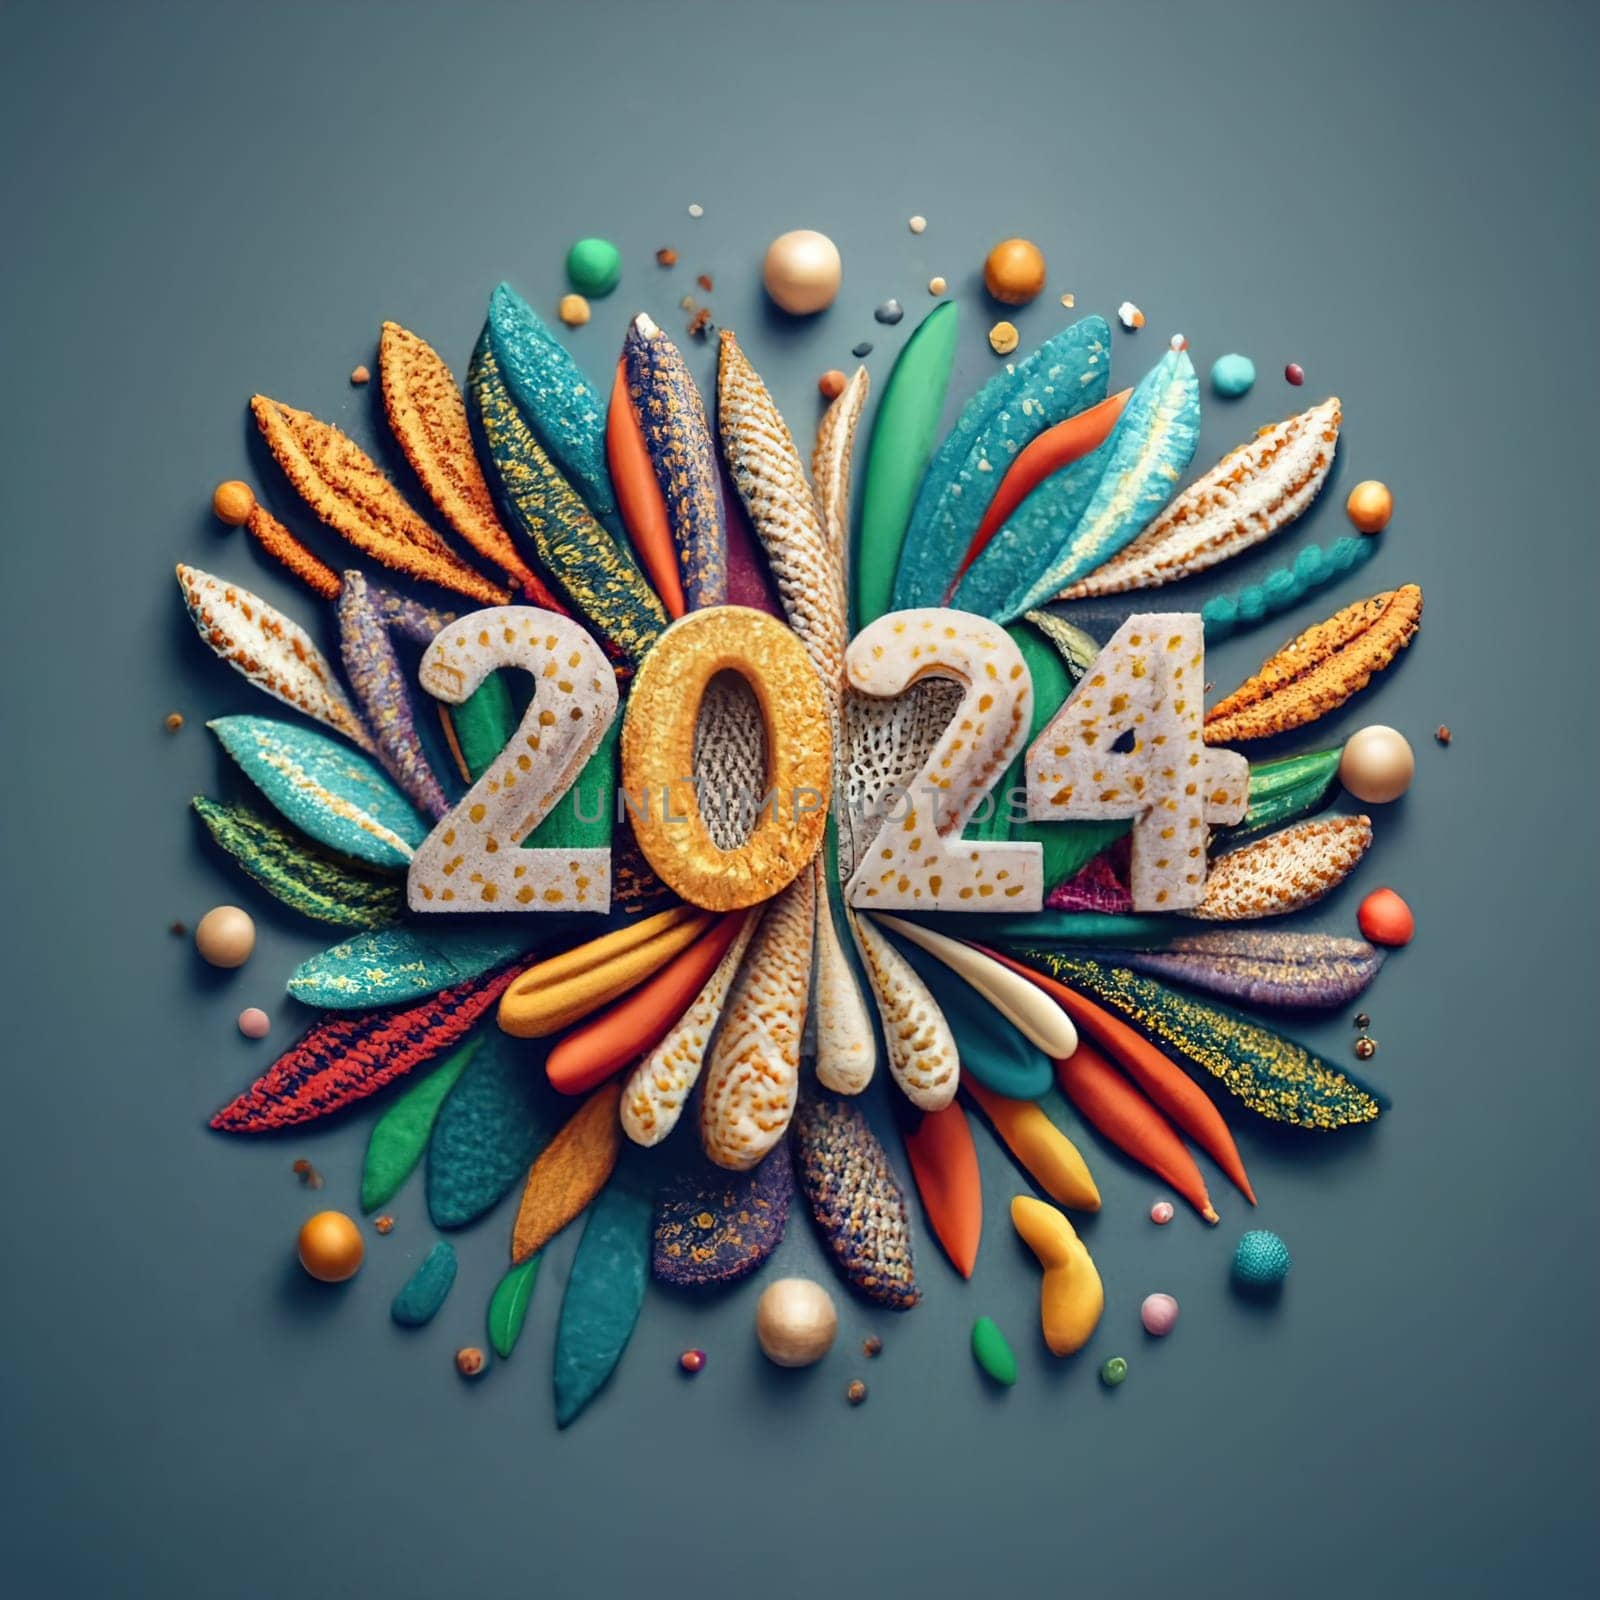 2024 Happy New Year Text in Embroidery on Textured Fabric - Stylish and Festive Embroidered Design by igor010